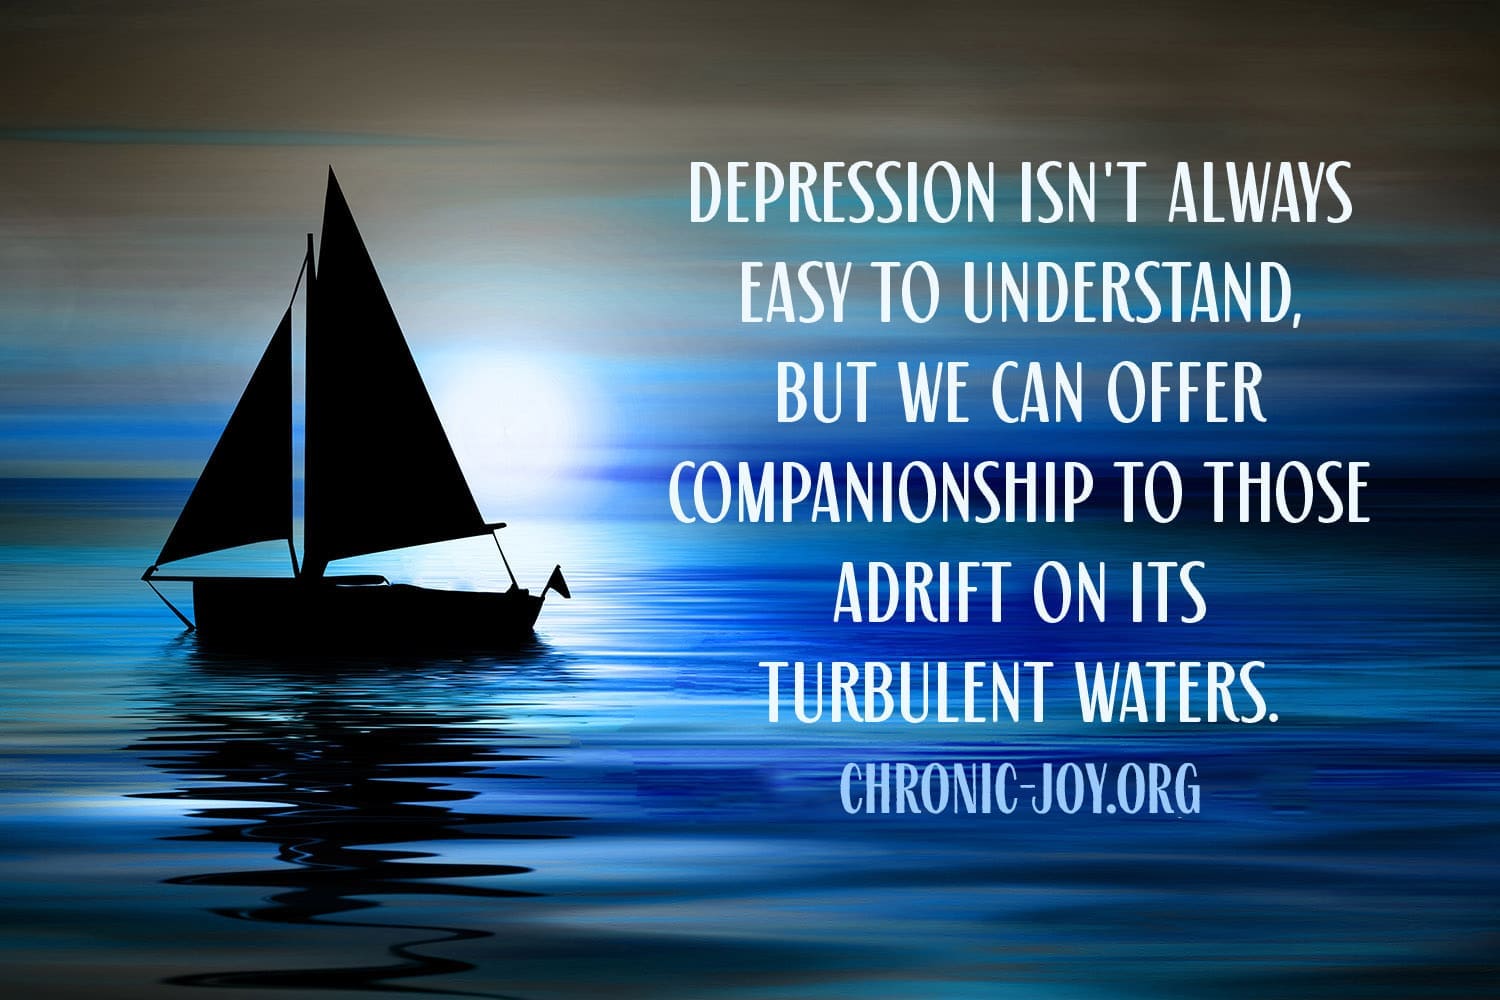 Depression isn't always easy to understand, but we can offer companionship to those adrift on its turbulent waters.